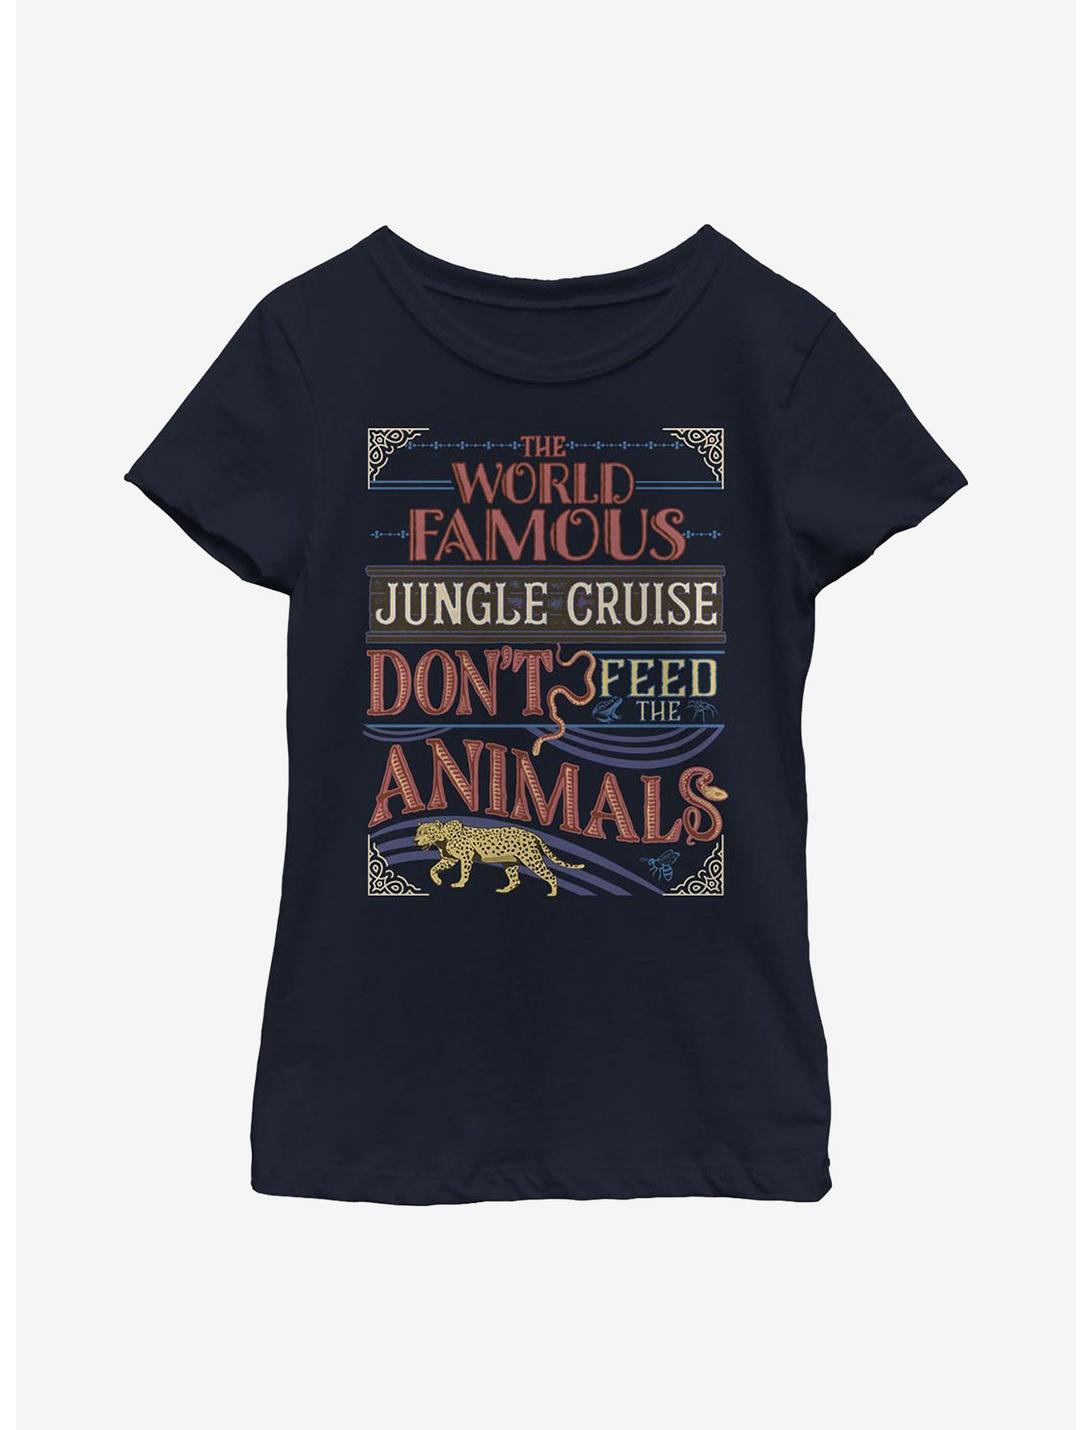 Disney Jungle Cruise The World Famous Jungle Cruise Don't Feed The Animals Youth Girls T-Shirt, NAVY, hi-res